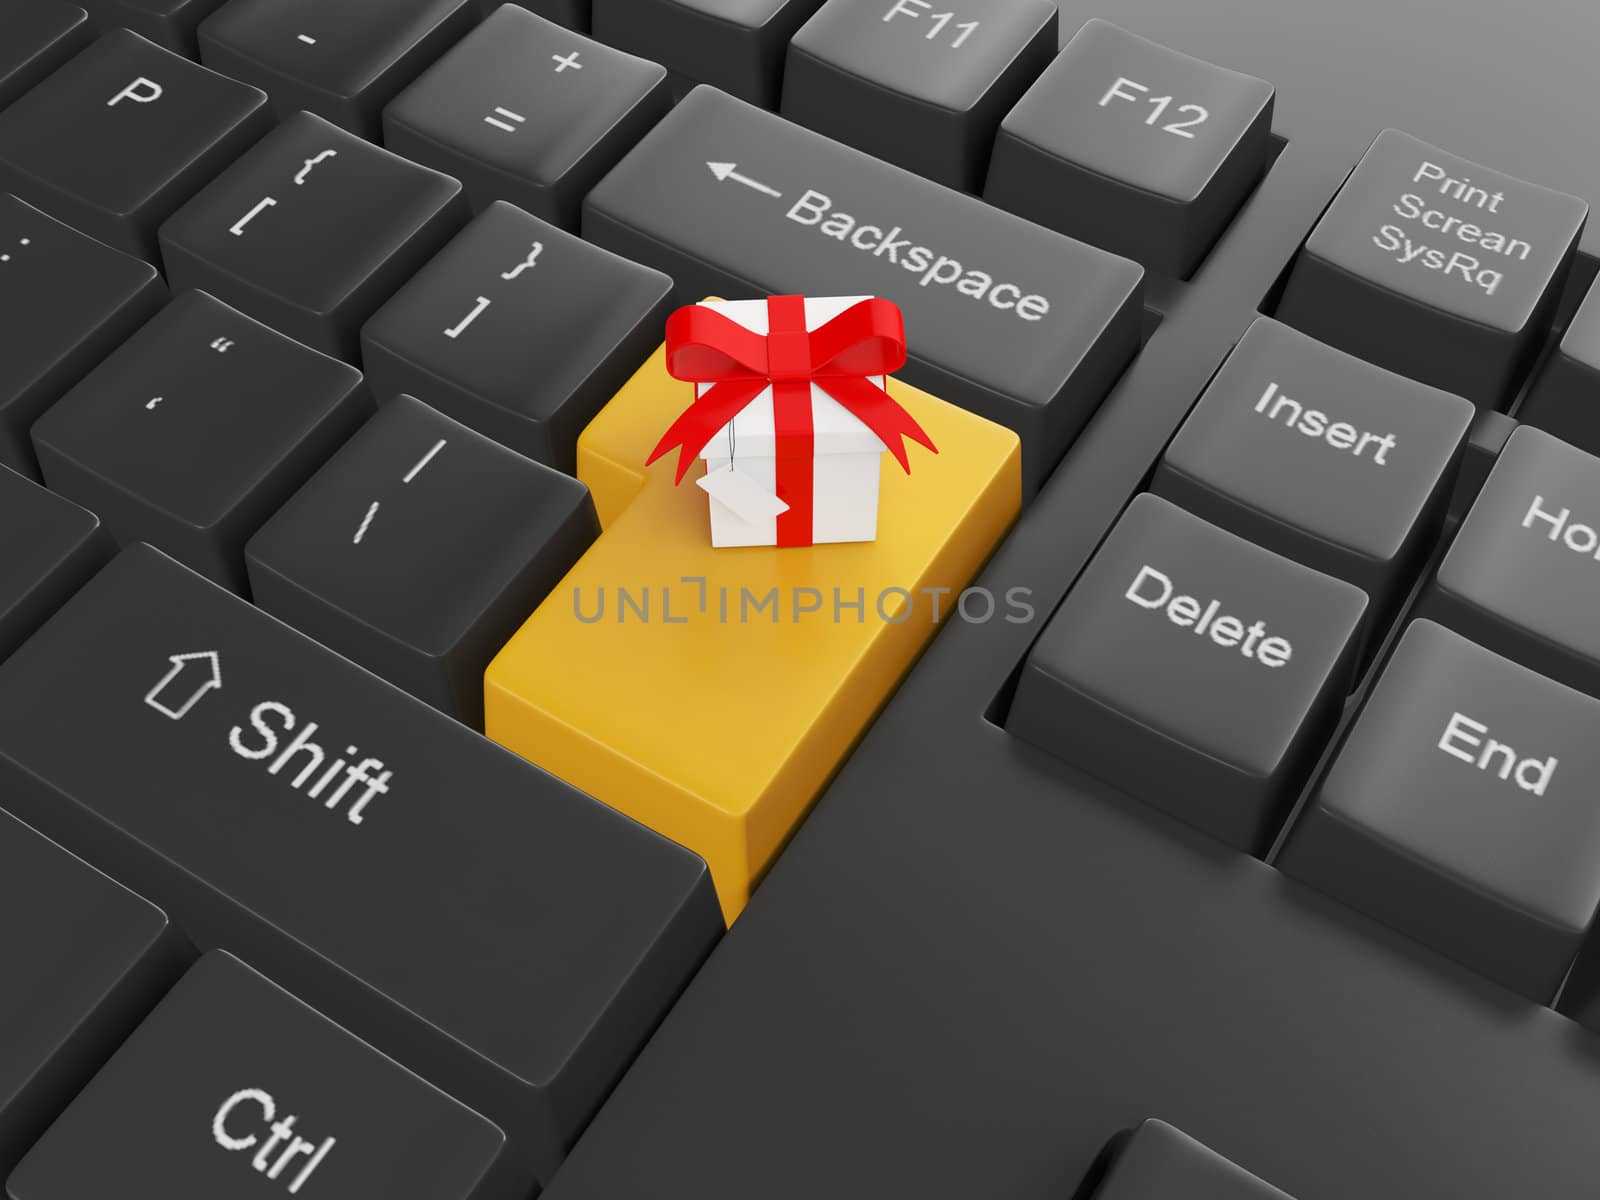 Computer technology. Keyboard with a gift Enter key to send a gift to a friend